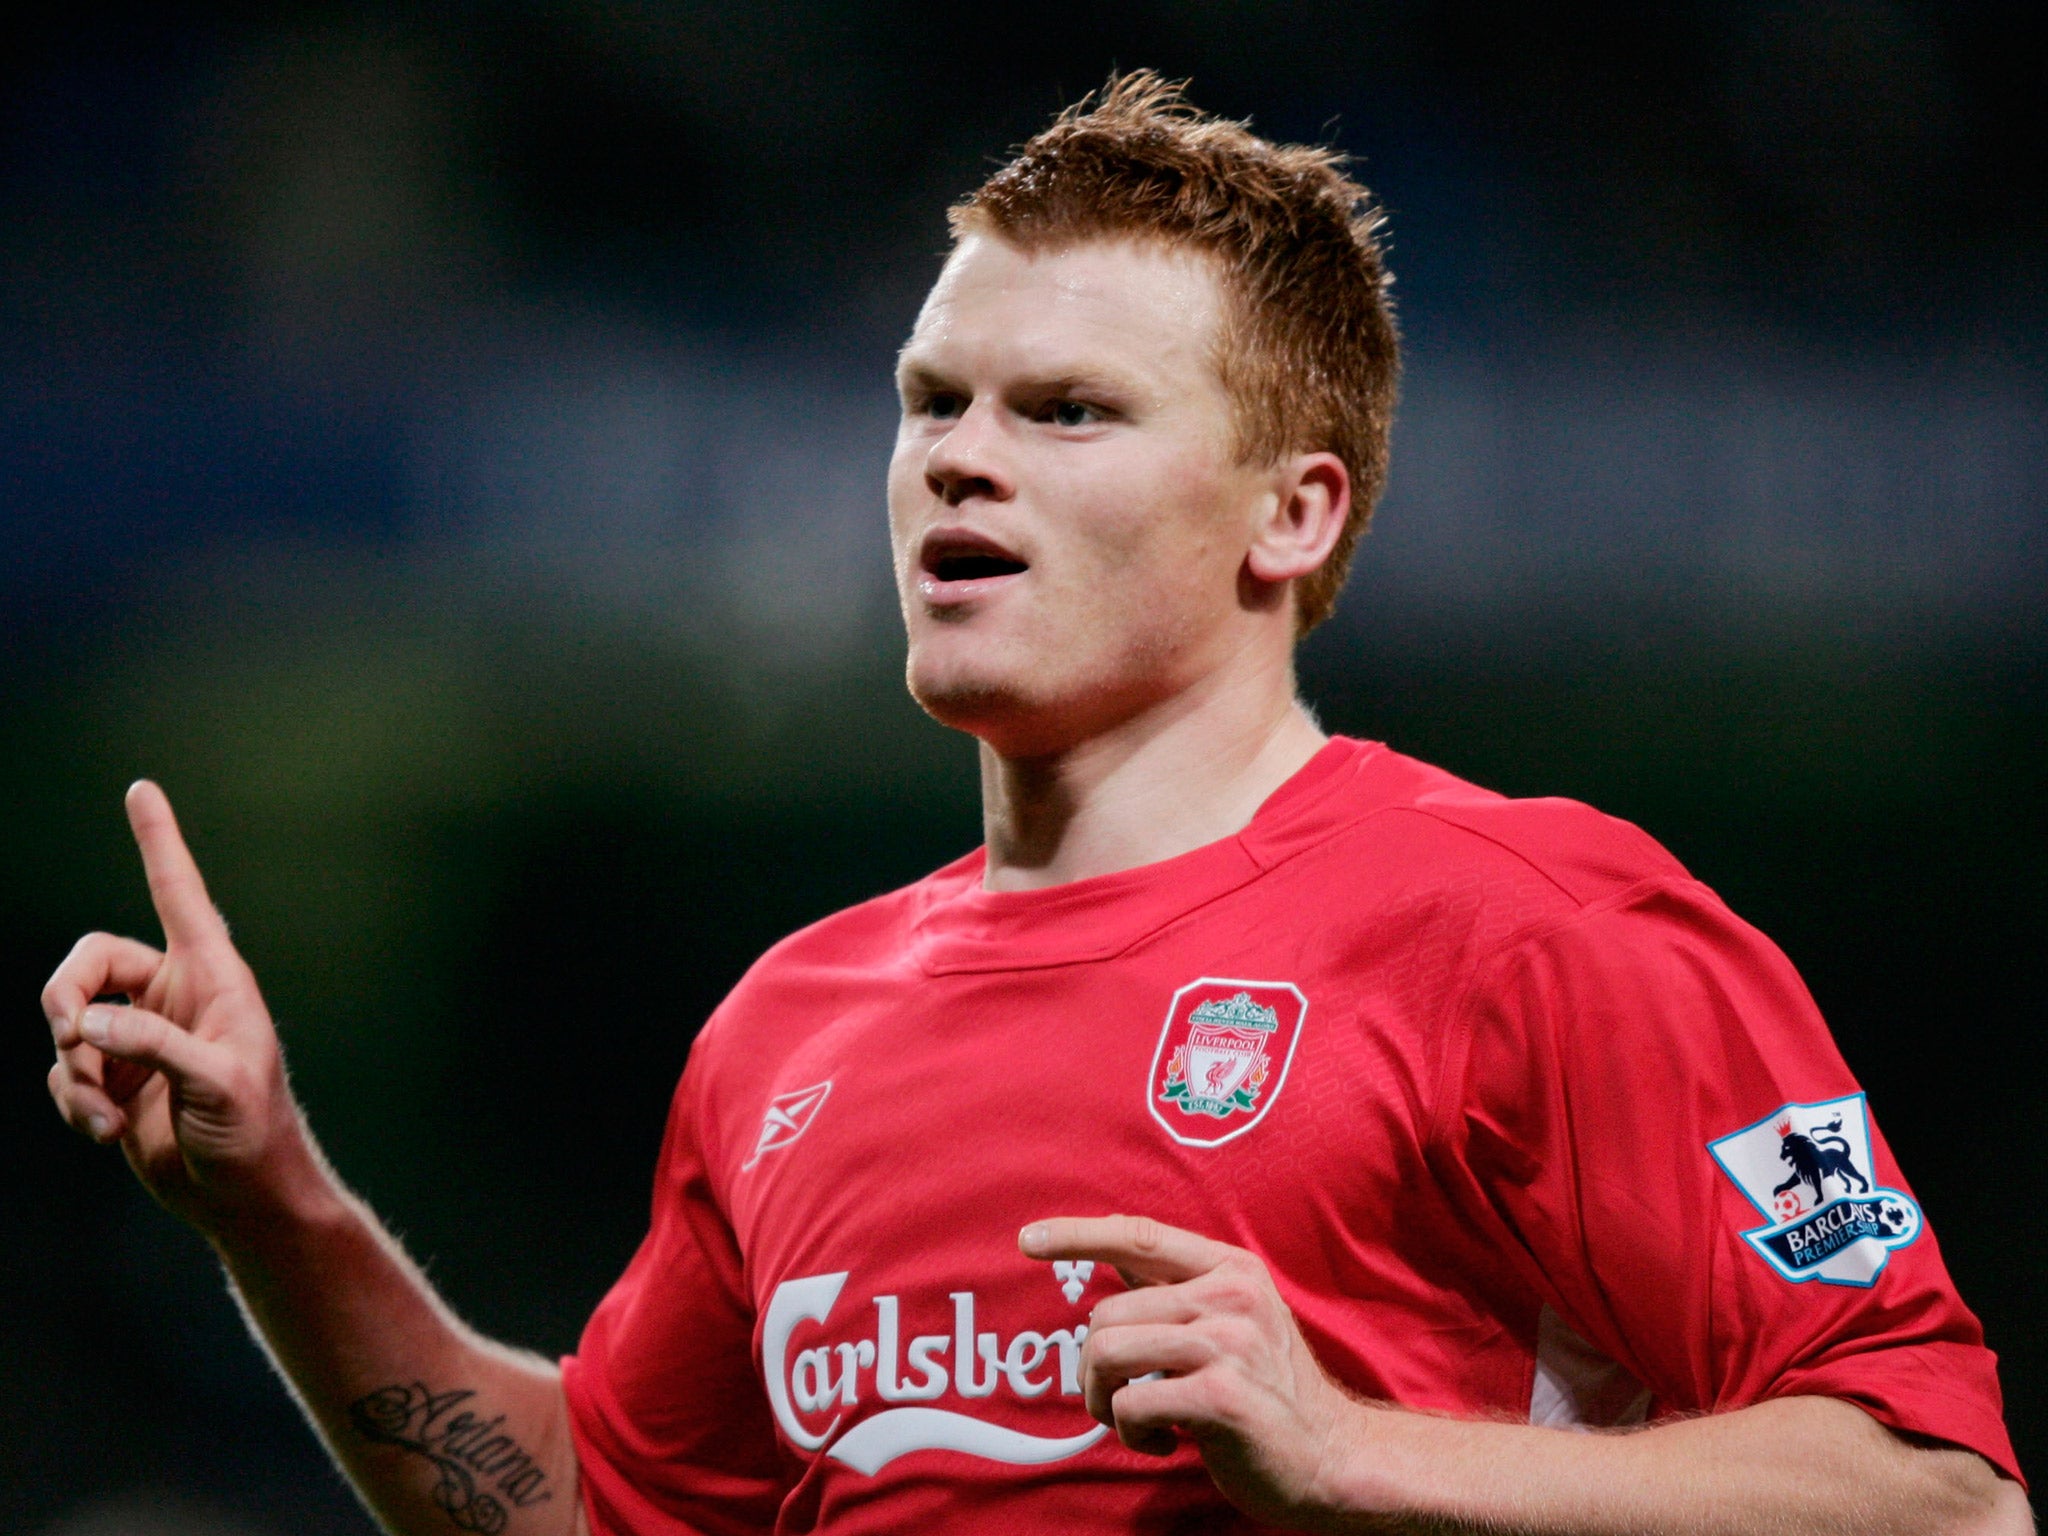 John Arne Riise playing for Liverpool in 2006